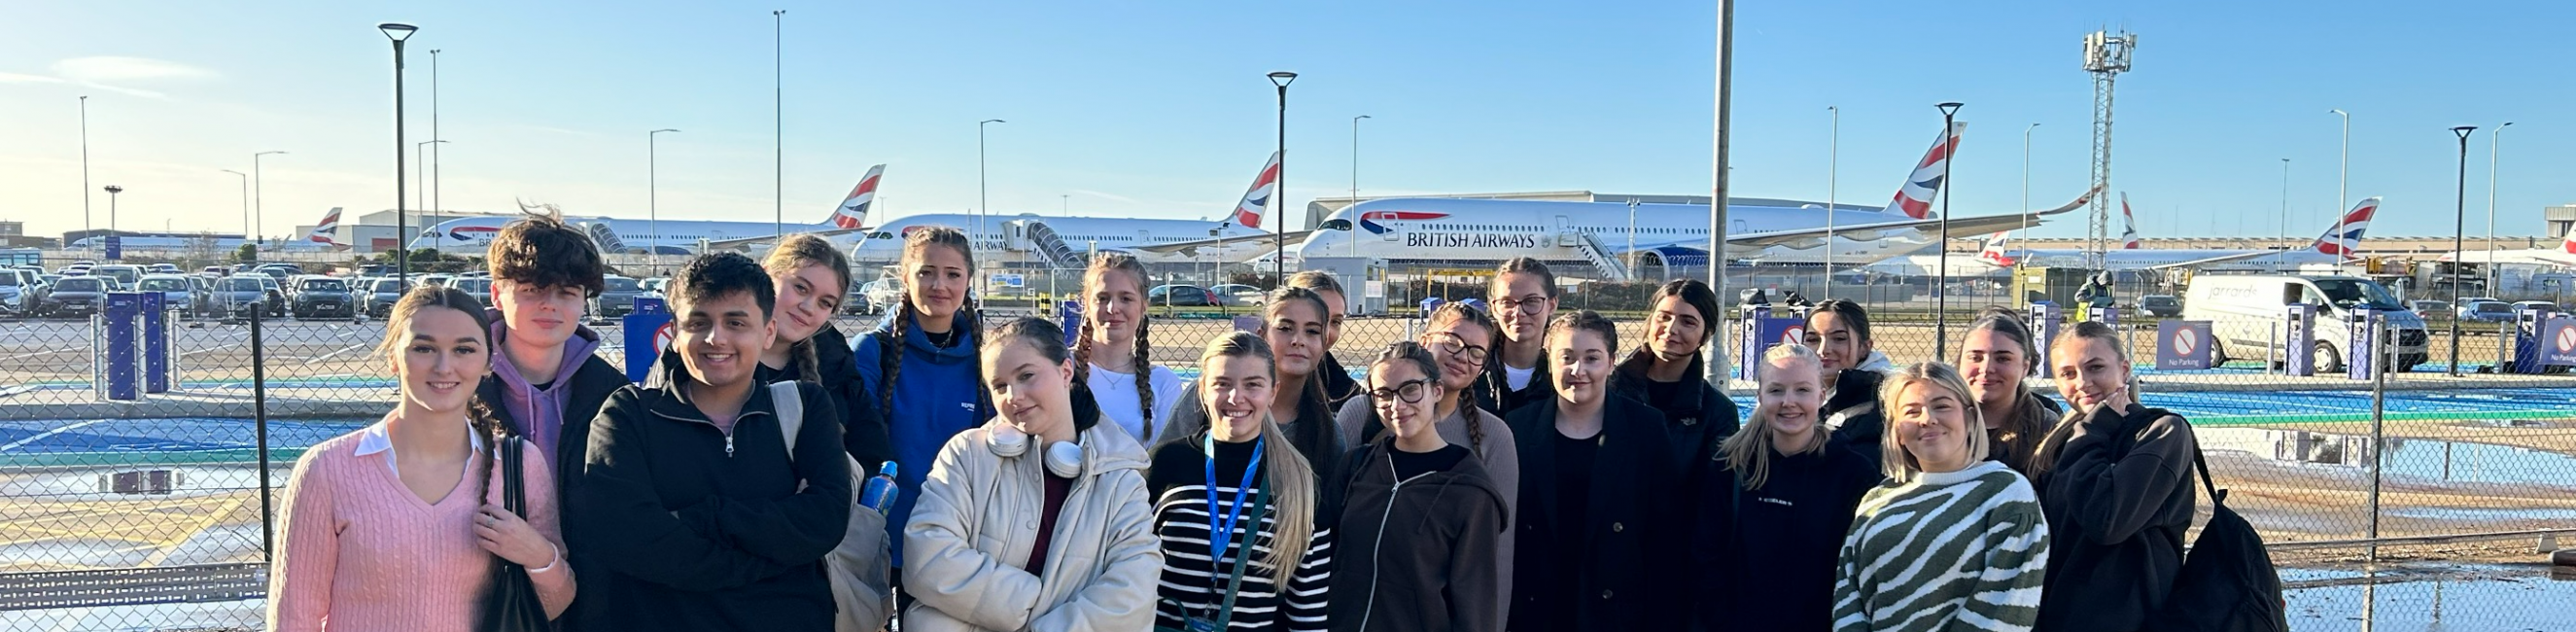 Learners in front of planes at Heathrow Airport